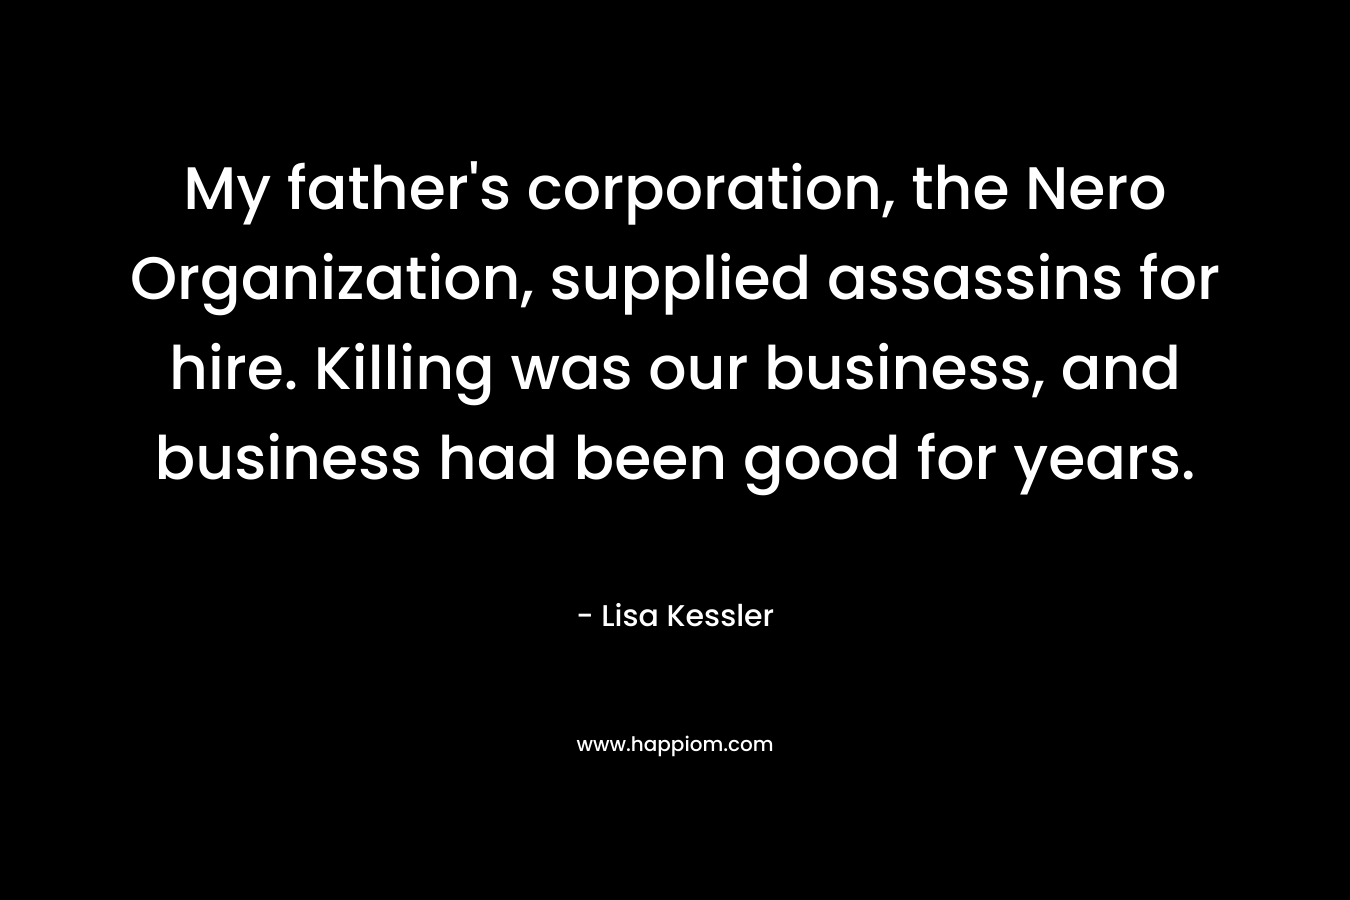 My father’s corporation, the Nero Organization, supplied assassins for hire. Killing was our business, and business had been good for years. – Lisa Kessler